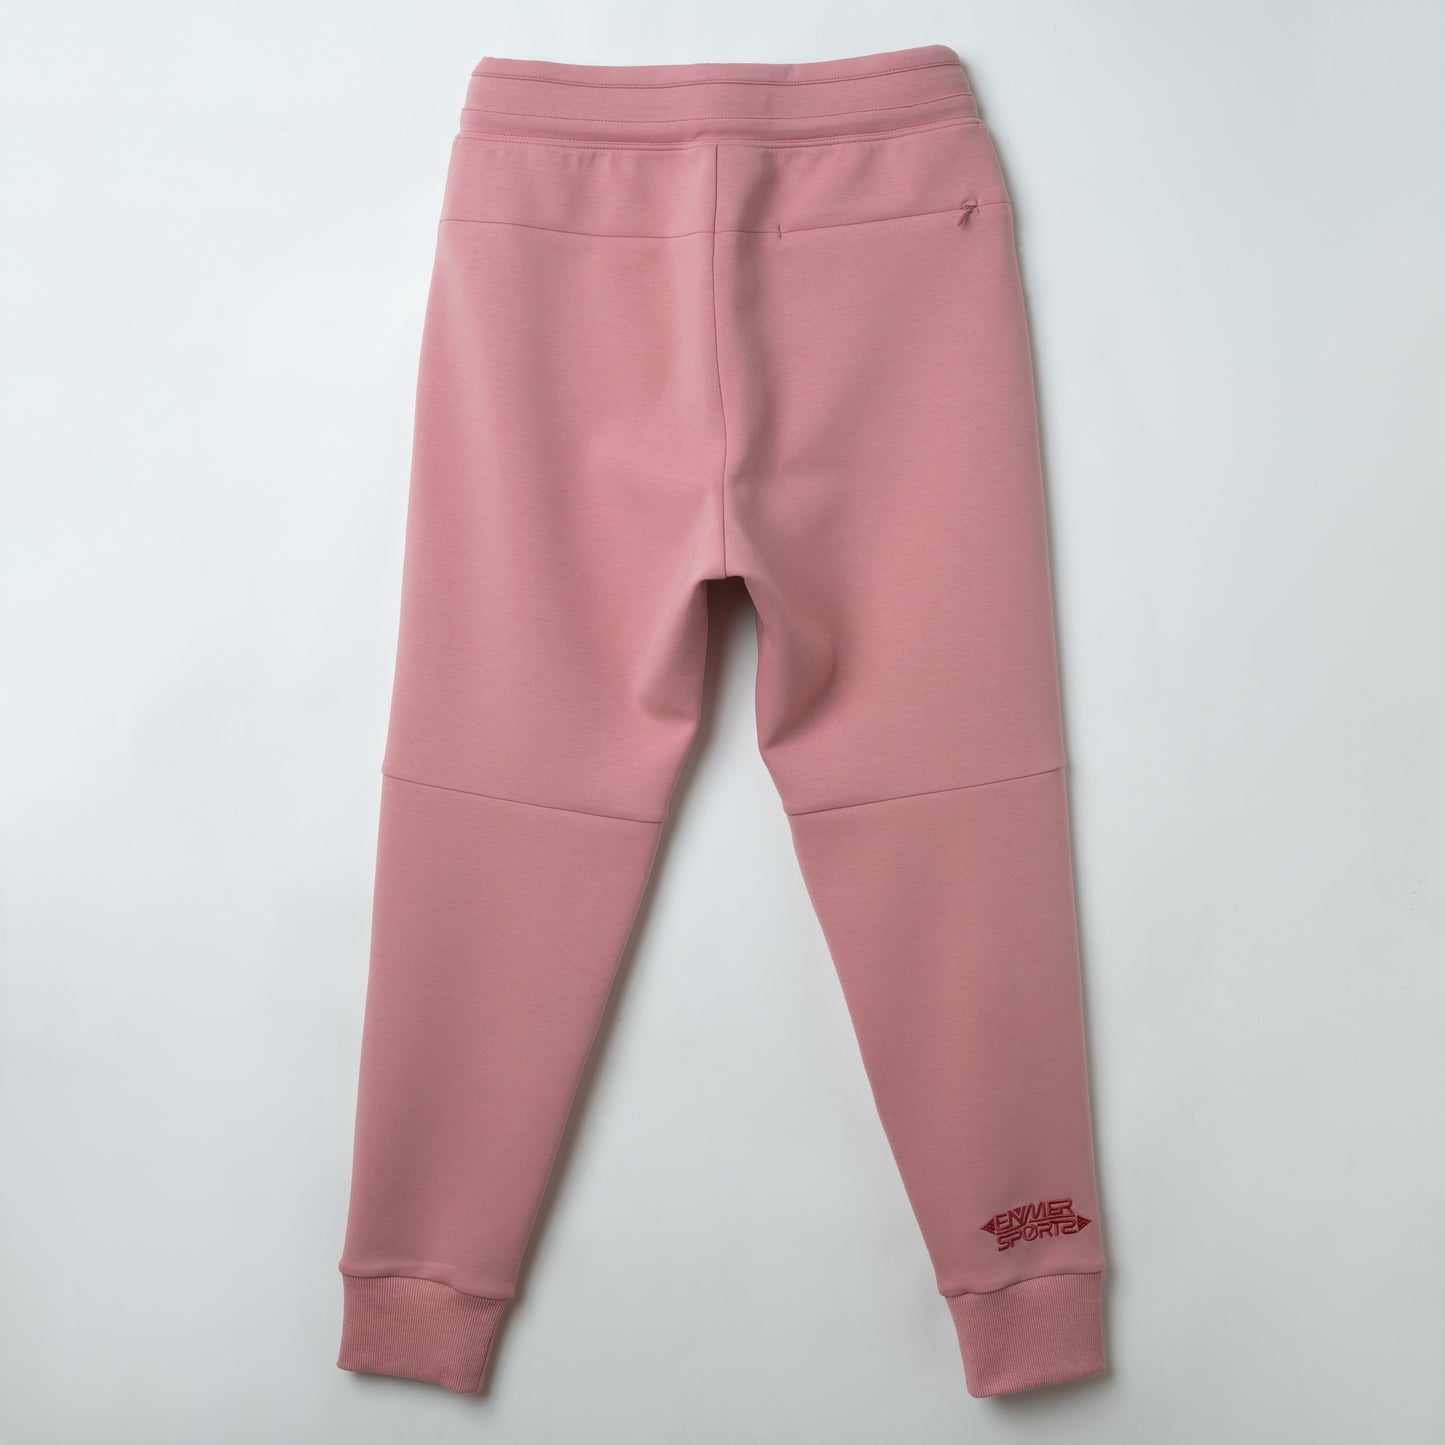 SPORTS MOVING PANTS 2nd Pink